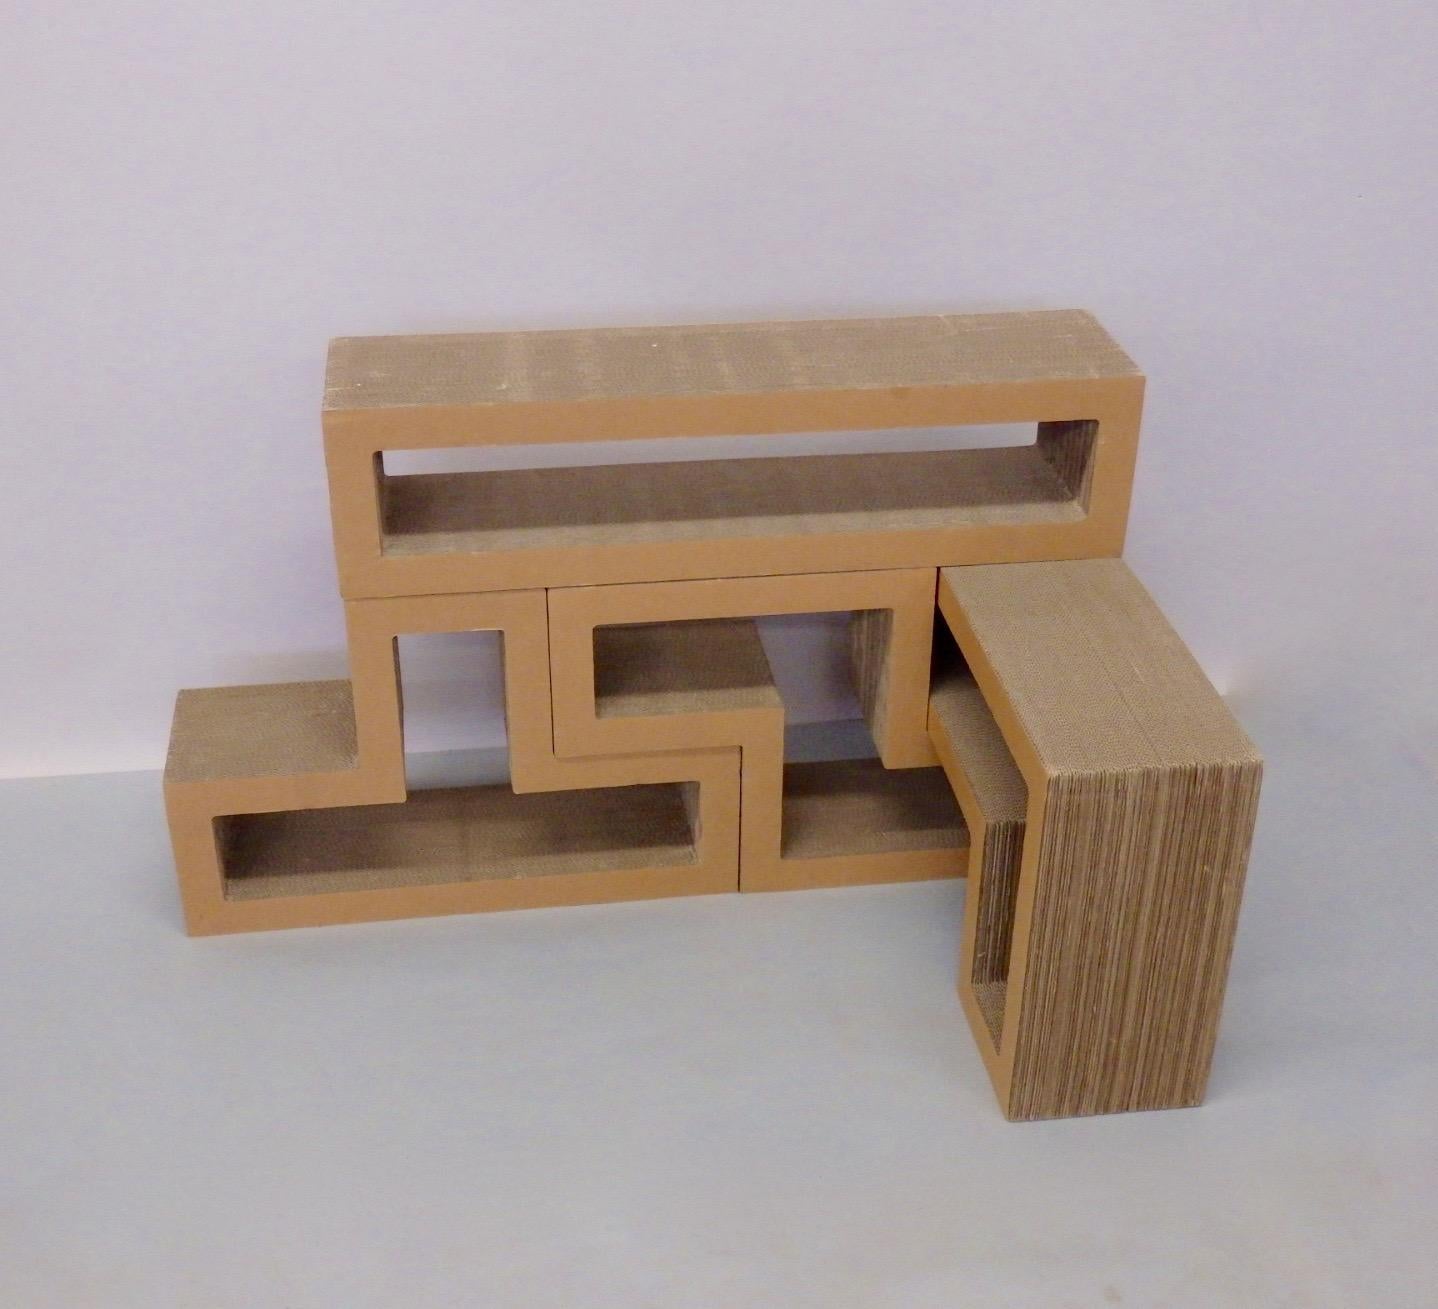 Cardboard Puzzle Piece Modular Shelf or Coffee Table Attributed to Frank Gehry 2